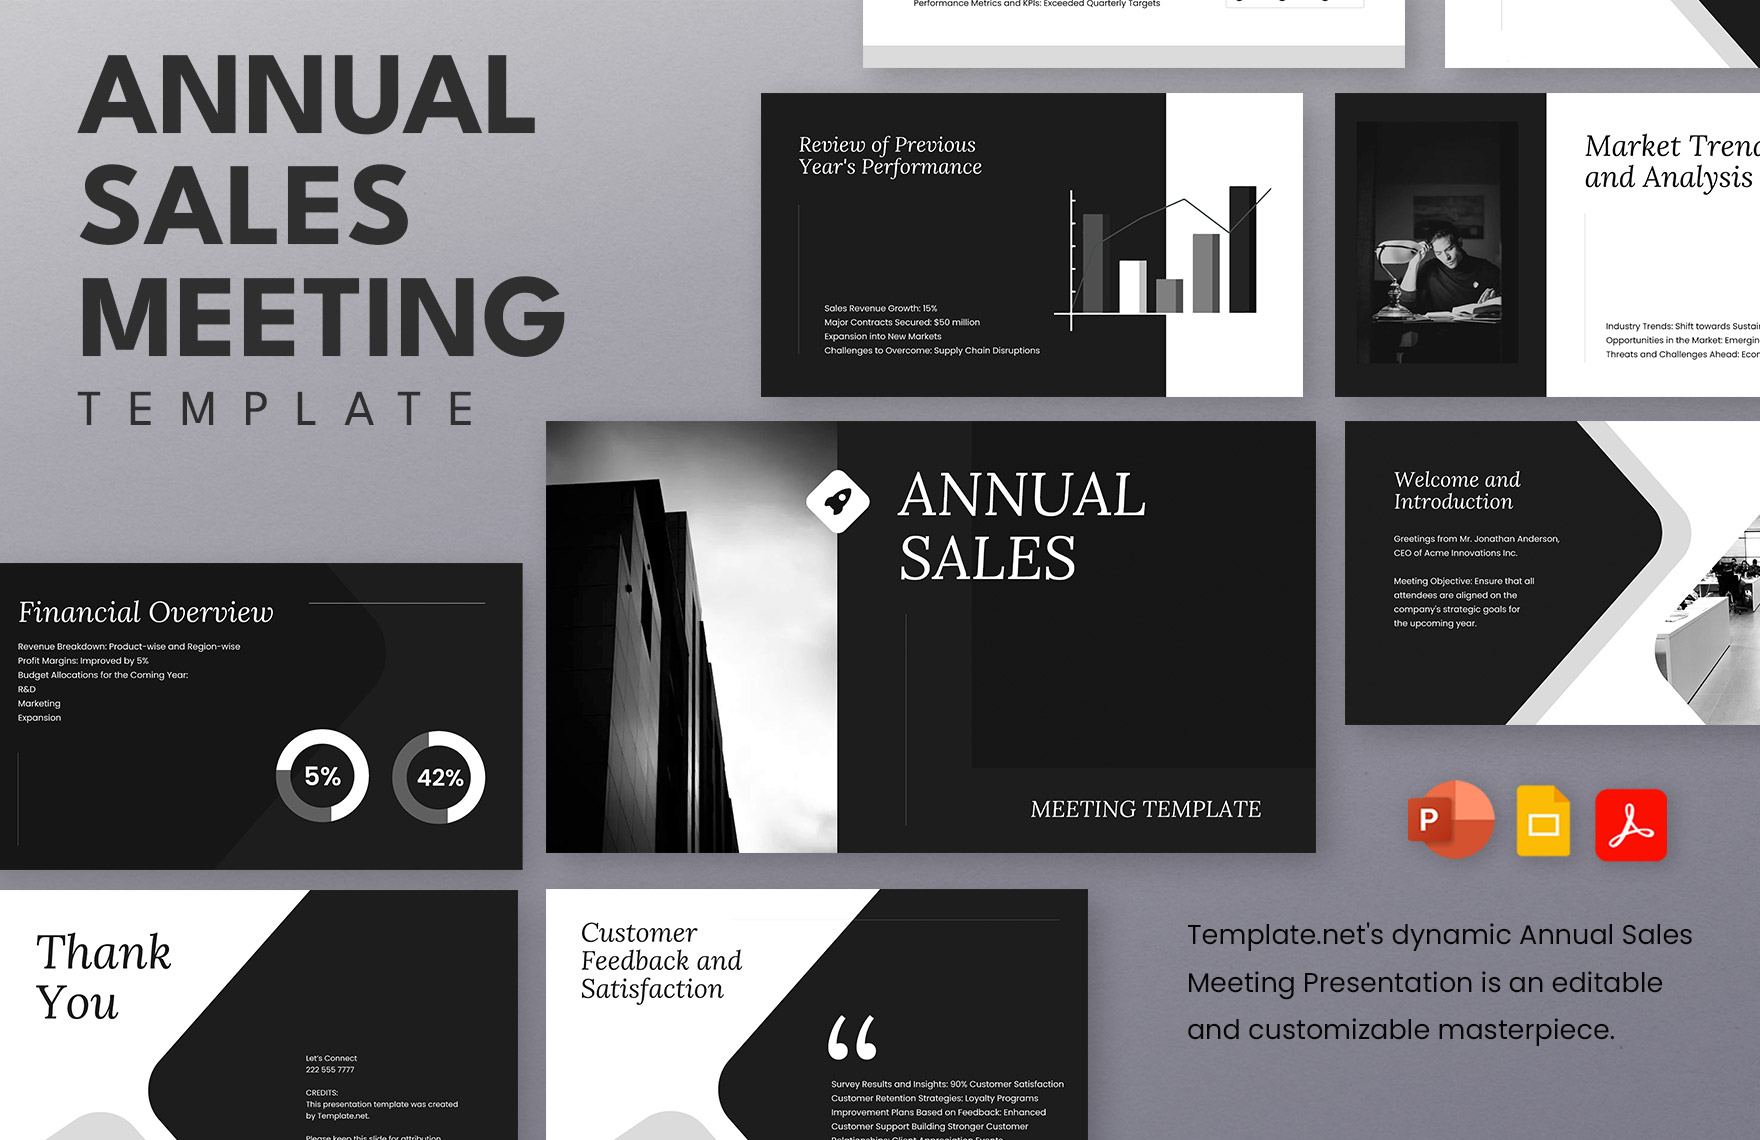 Annual Sales Meeting Template in PDF, PowerPoint, Google Slides